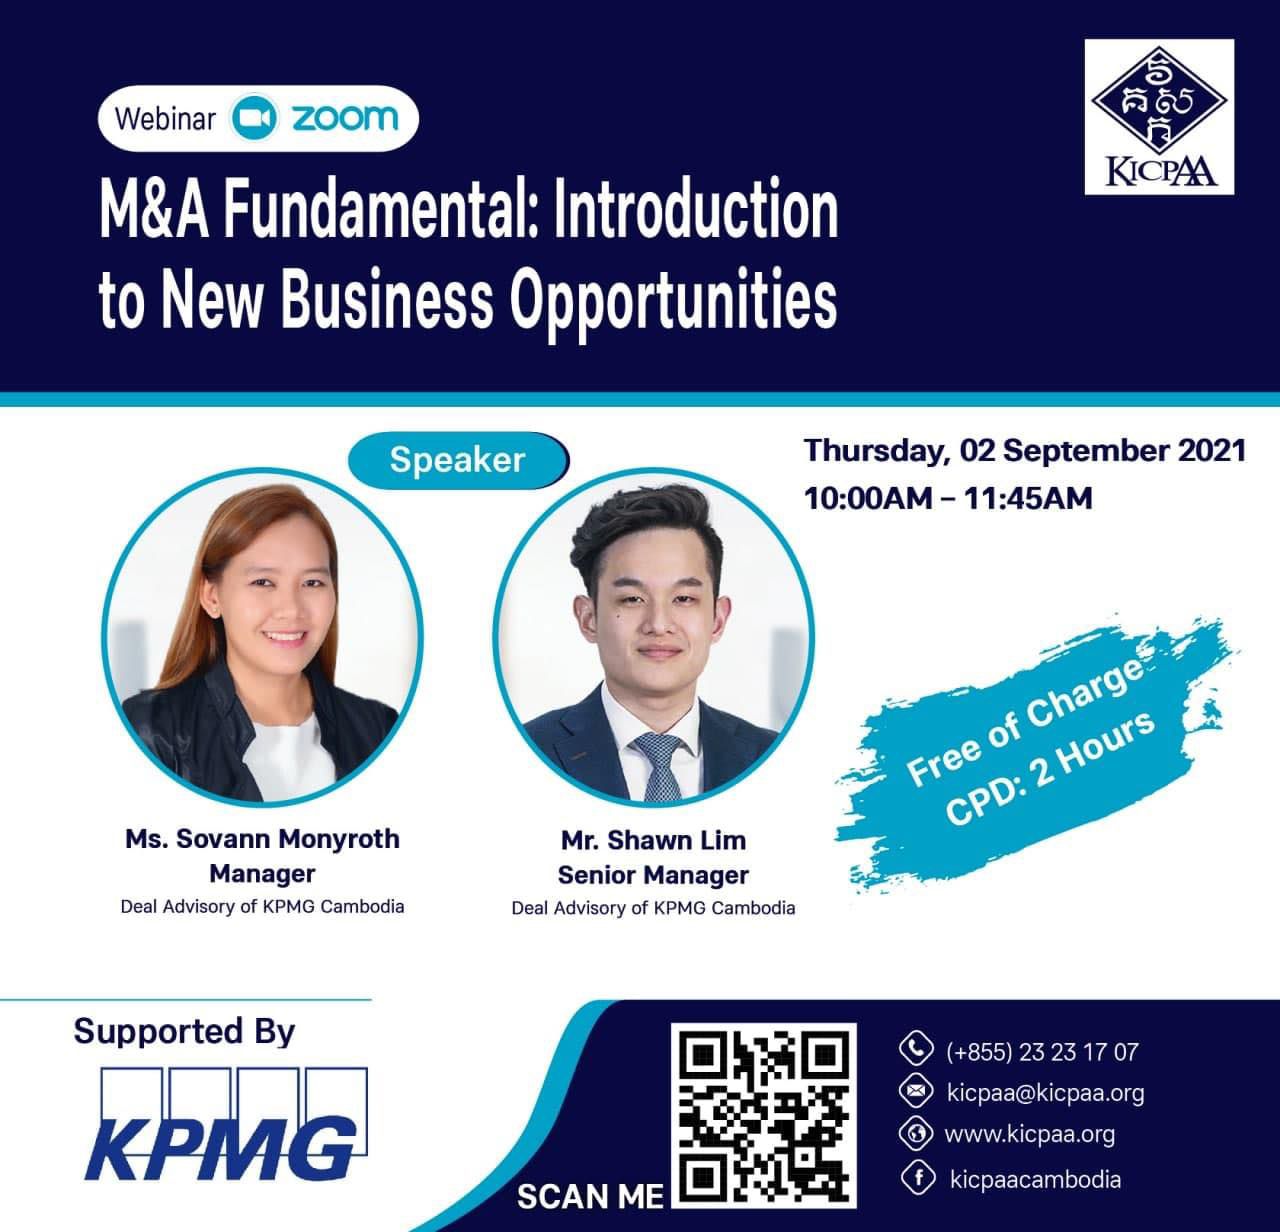 kpmg-kicpaa-introduction-to-new-business-opportunities